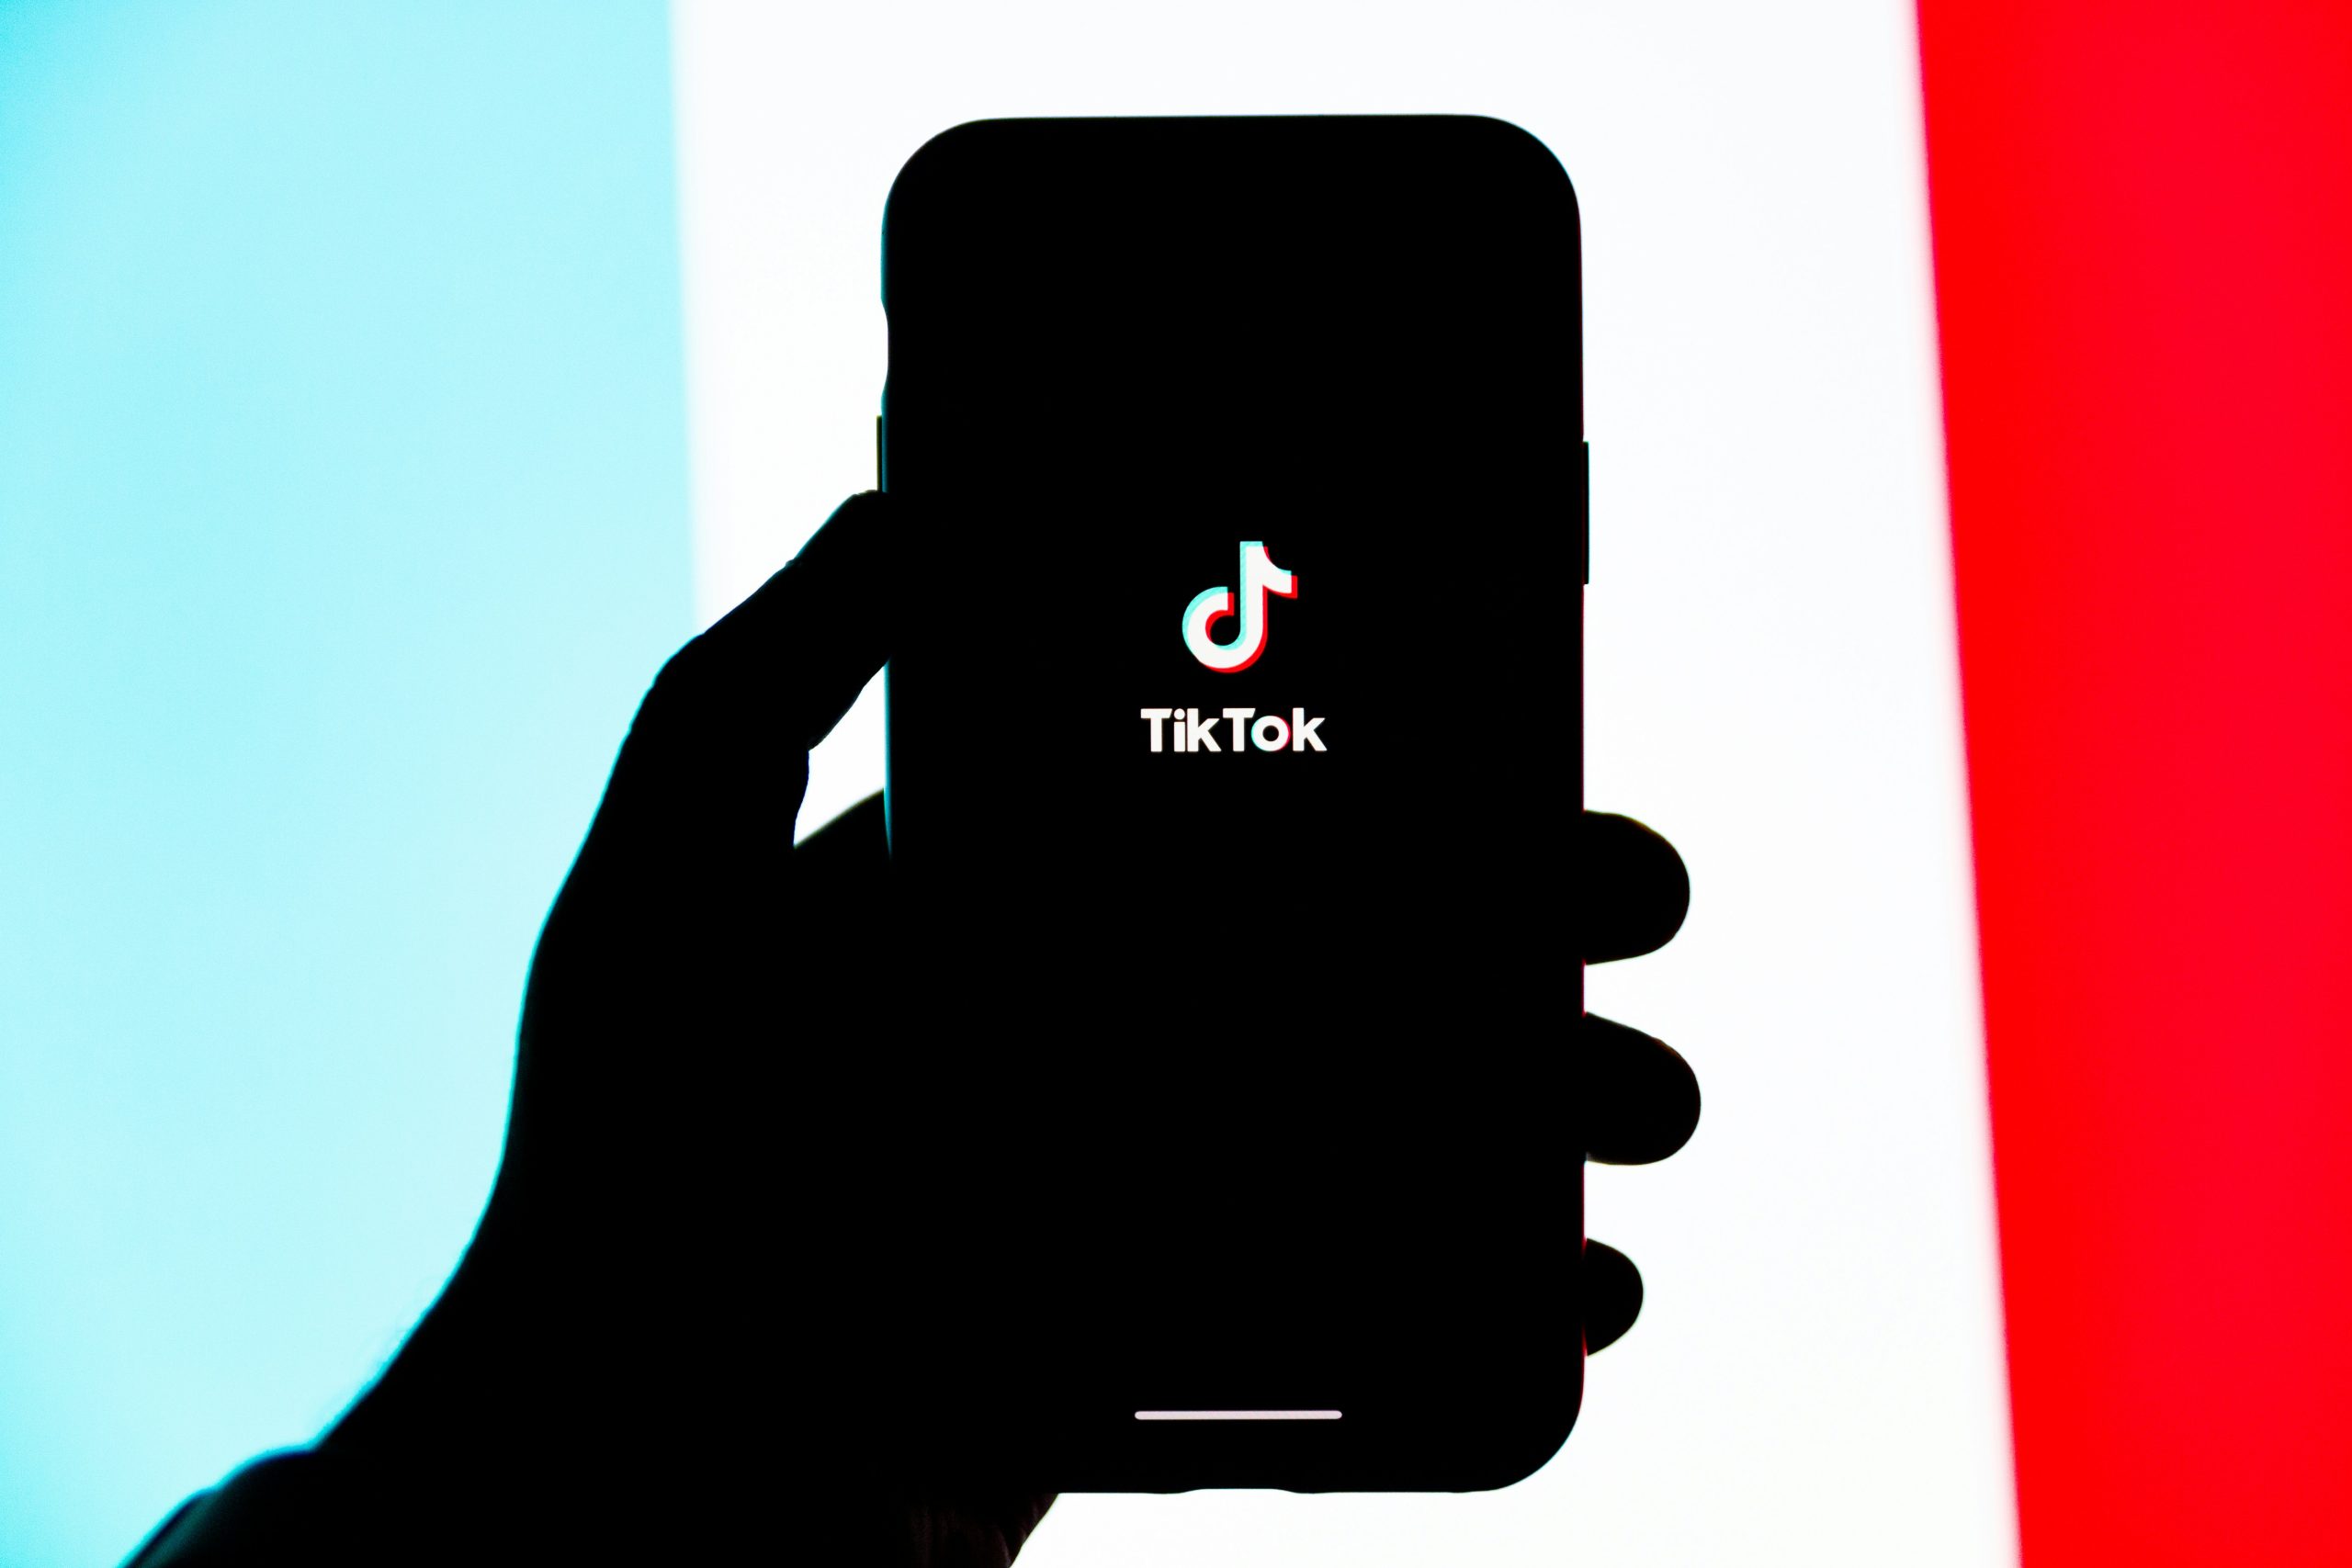 How to Get More TikTok Followers in UK and Make Yourself More Visible?